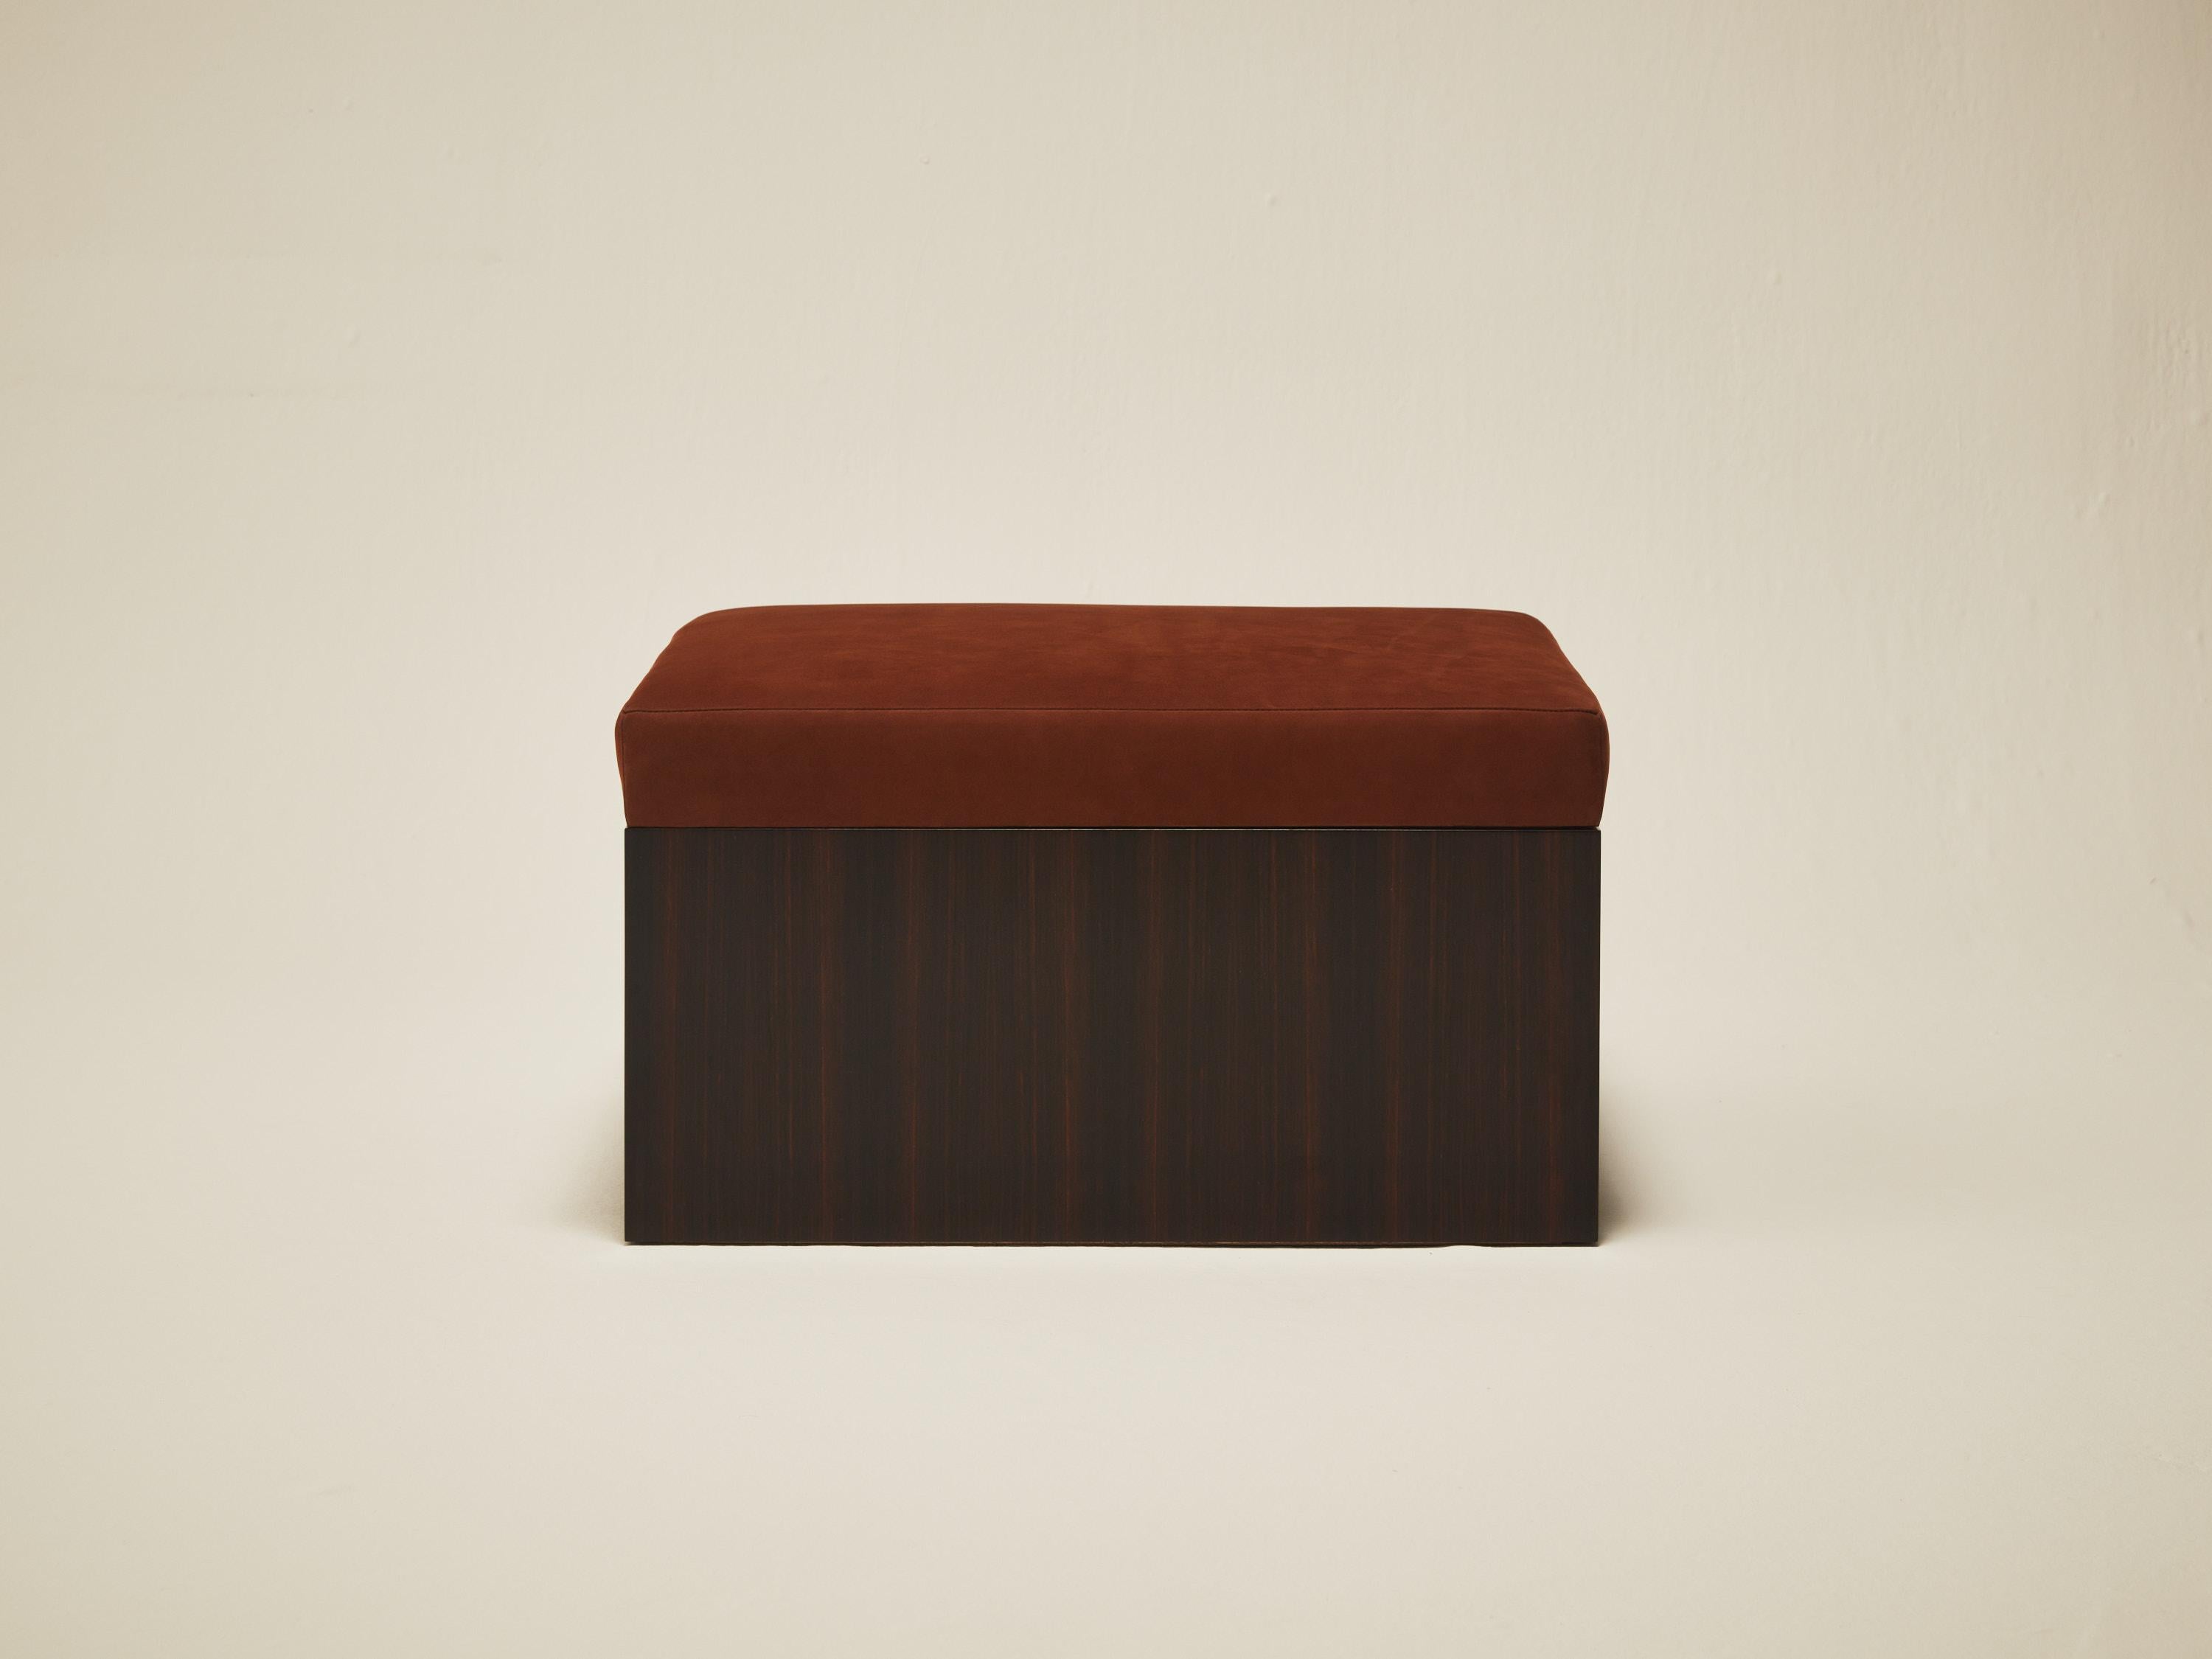 American Continuous Ottoman - Hand applied wood veneer & leather upholstery For Sale